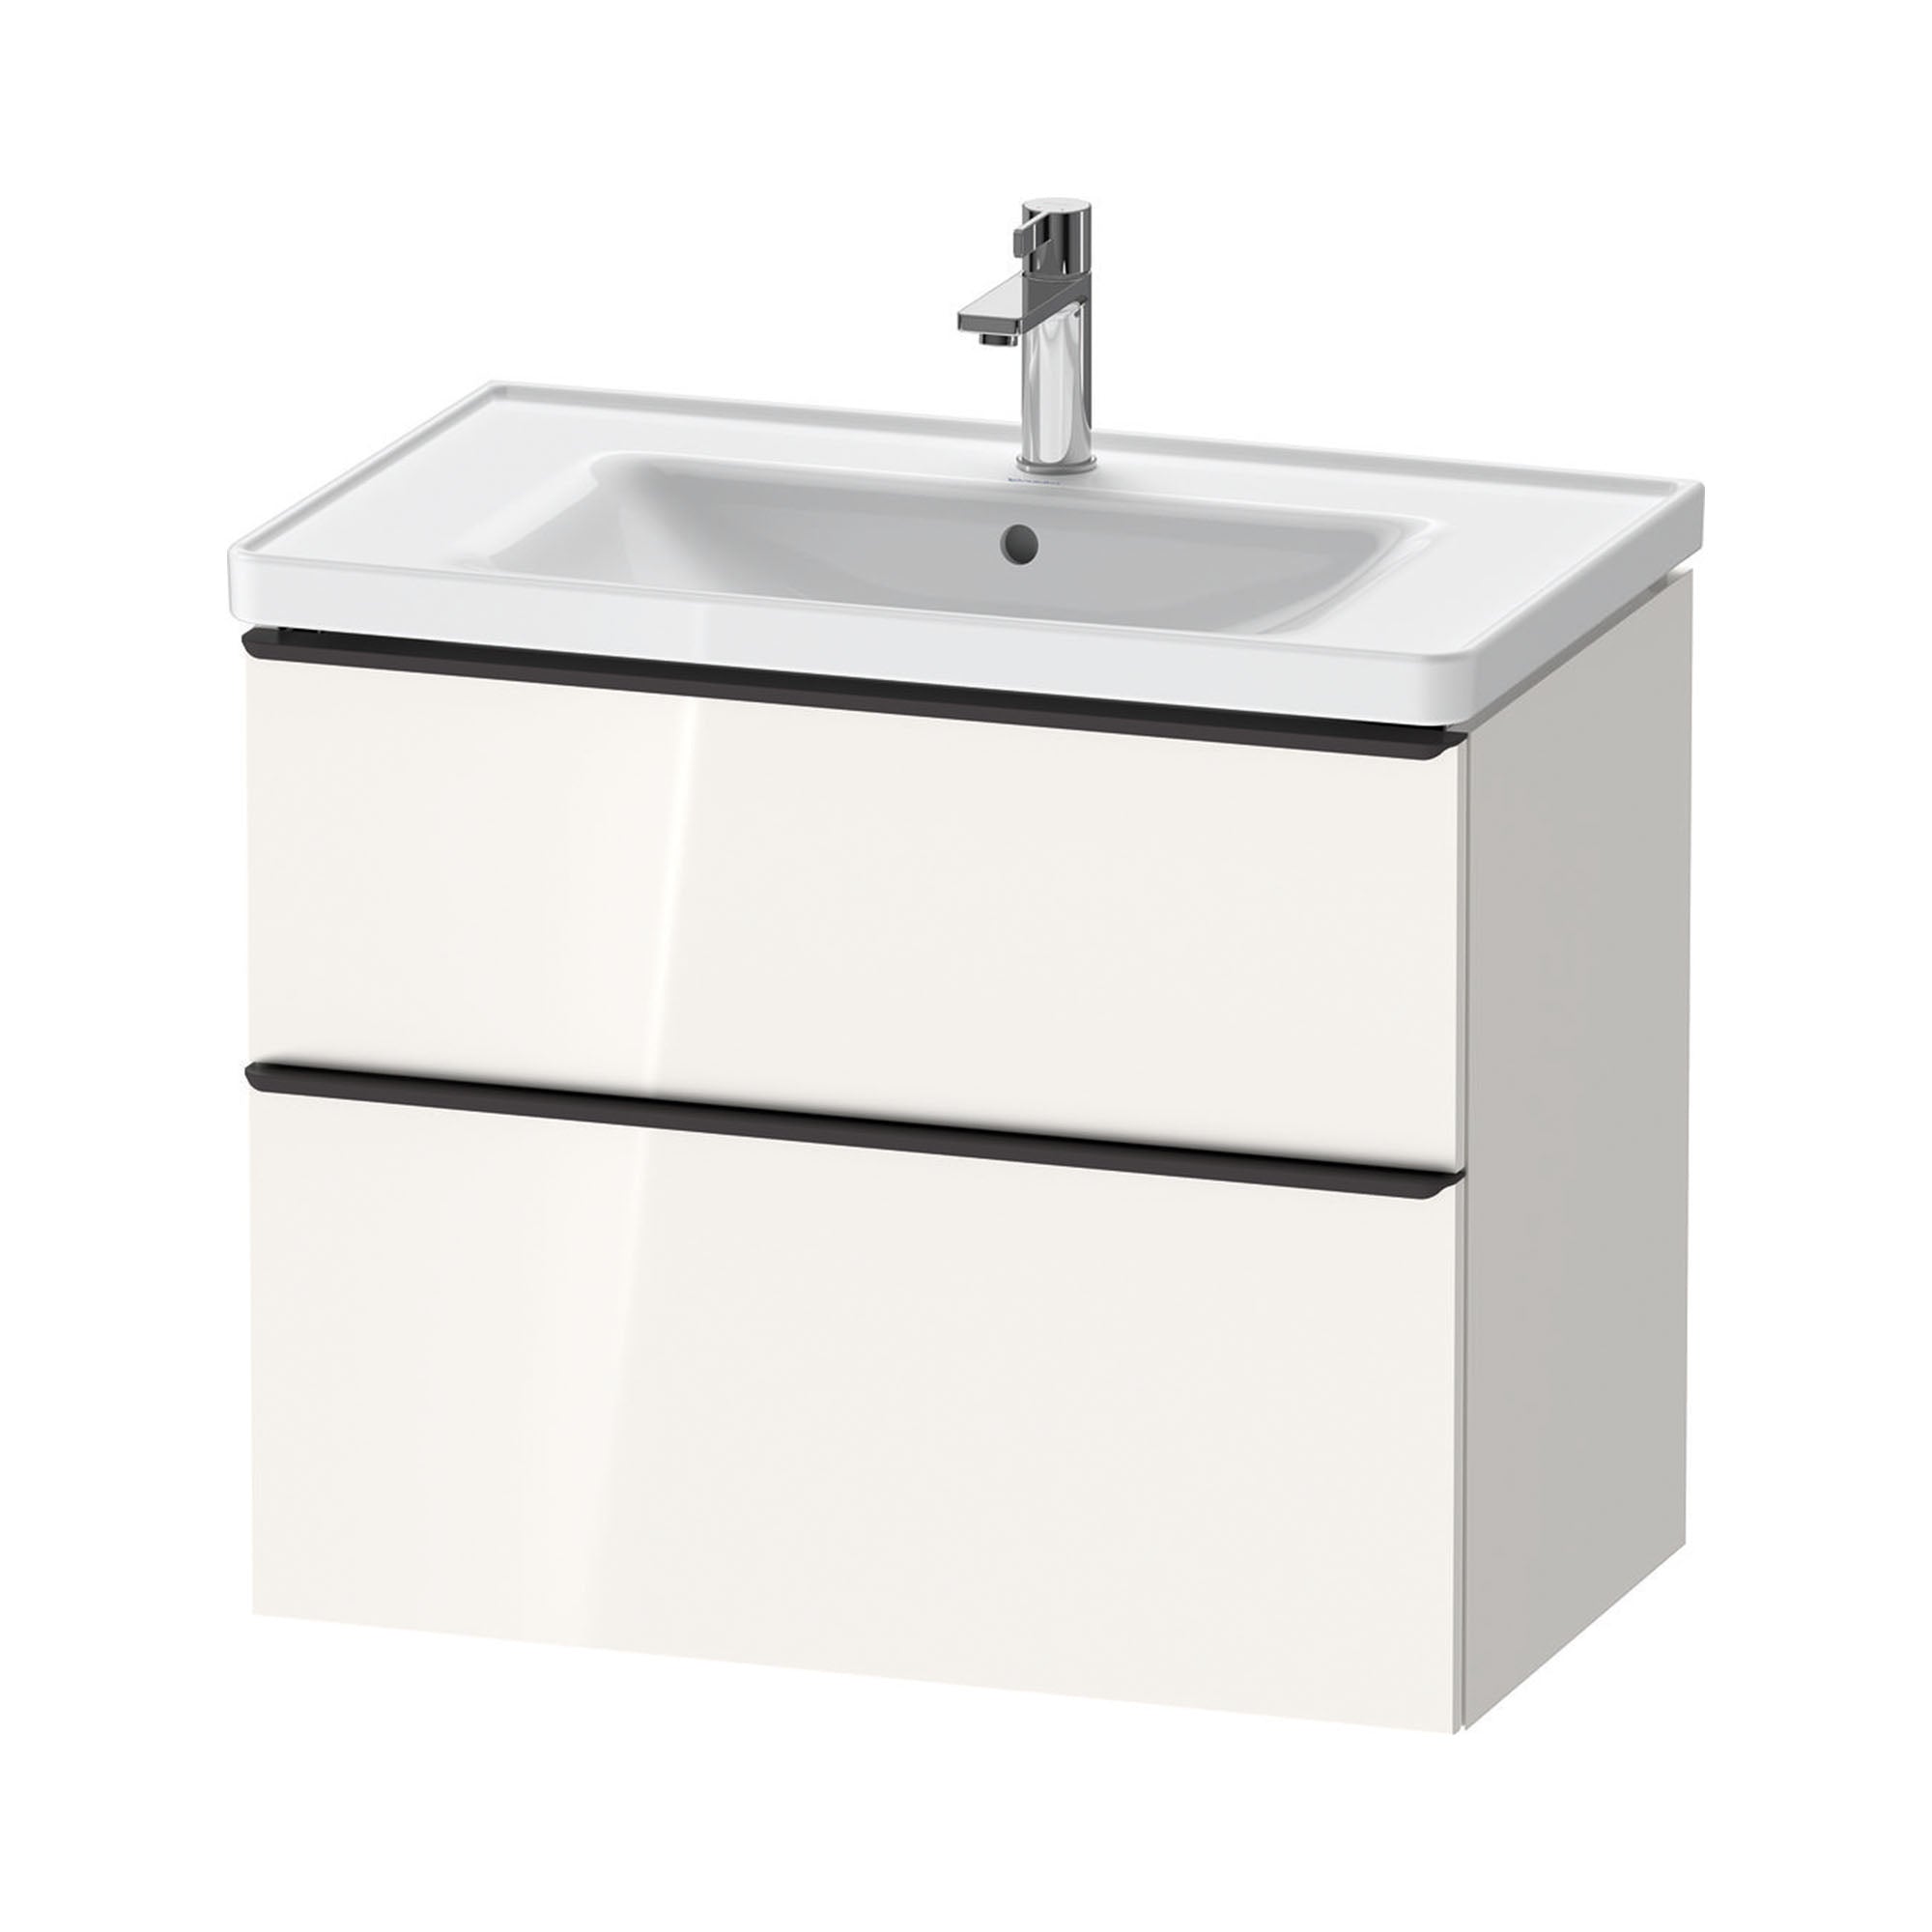 duravit d-neo 800mm wall mounted vanity unit with d-neo basin gloss white diamond black handles